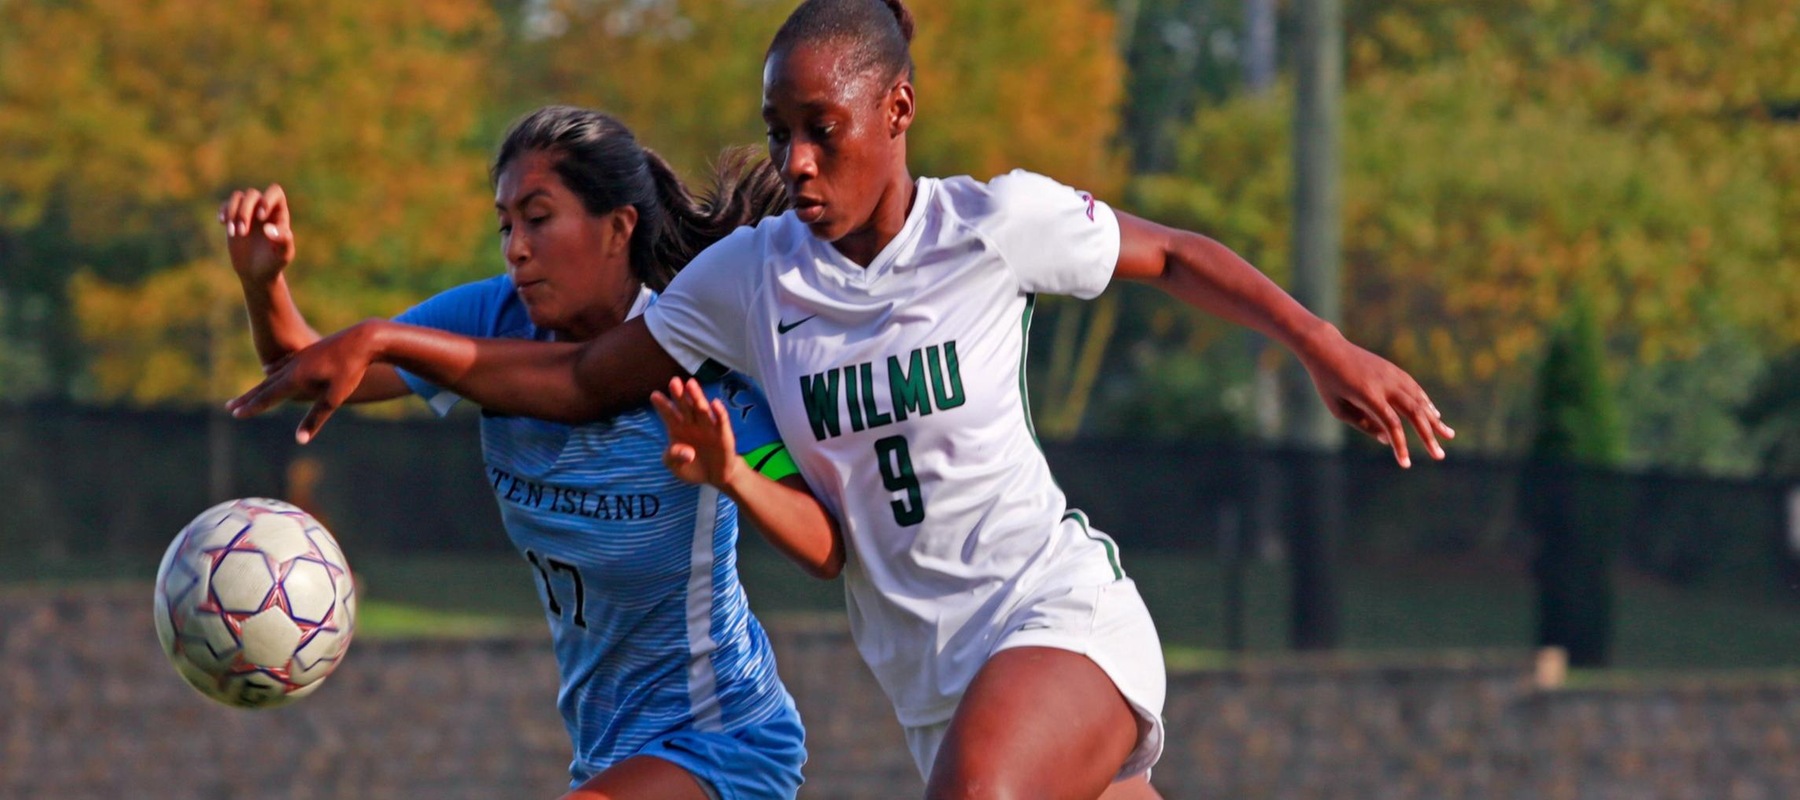 Wilmington University Players: Rochesha Dayes (9) competing for the ball while playing College of Staten Island: Angie Galan (17) during their NCAA womans soccer match at the Wilmington University sports facility in Newark, Delaware, October 14, 2021

Chris Rifon Photo